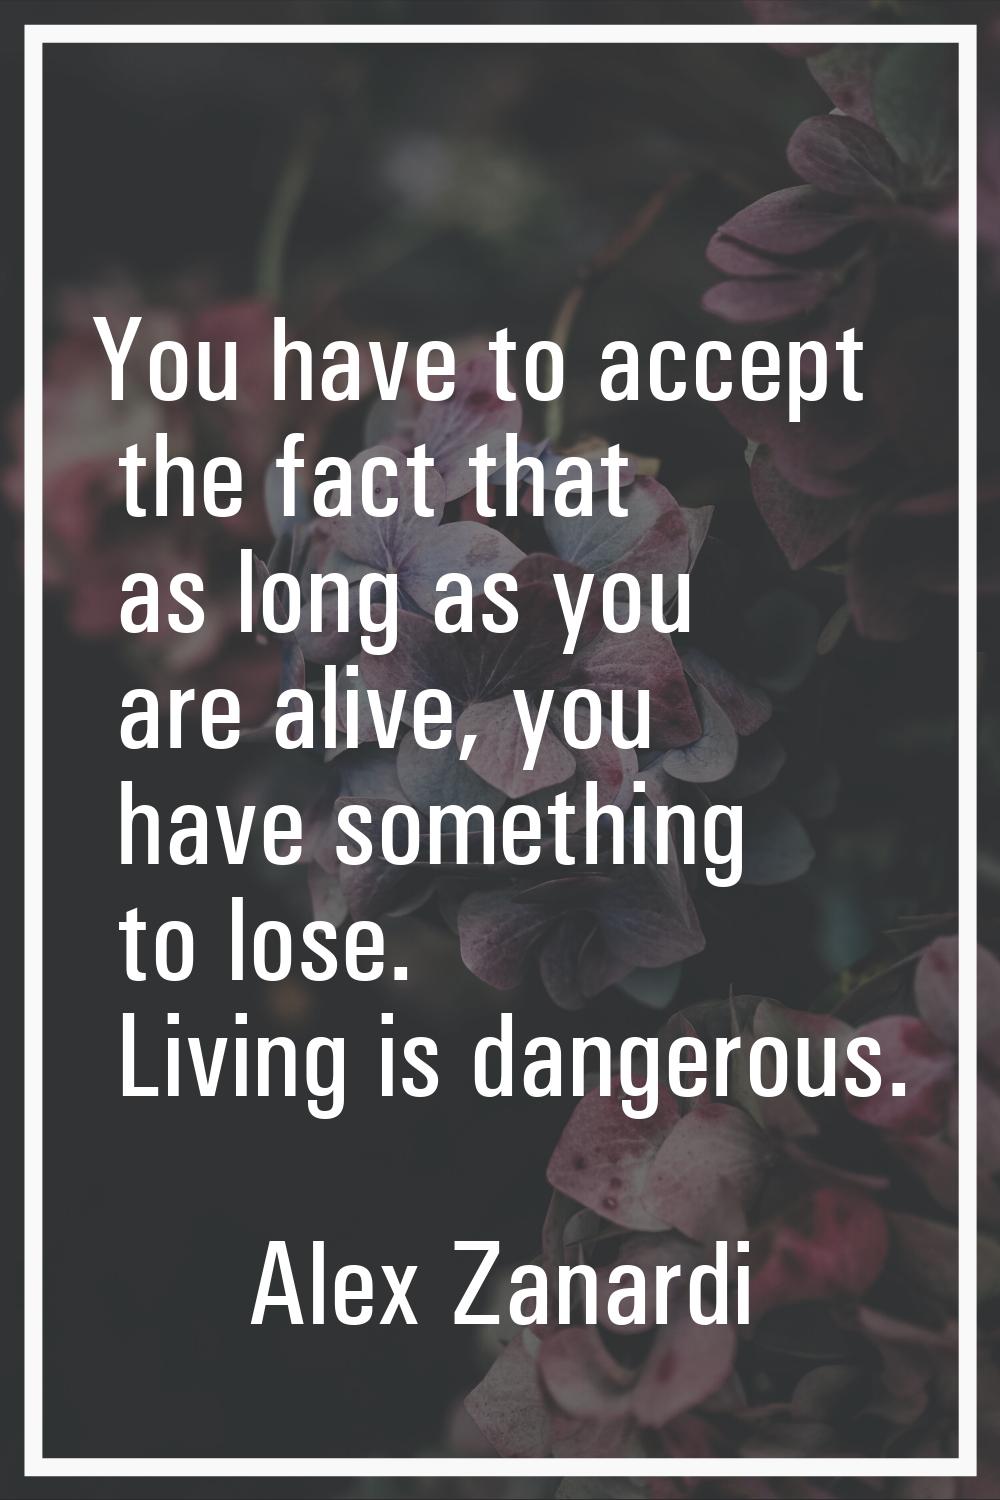 You have to accept the fact that as long as you are alive, you have something to lose. Living is da